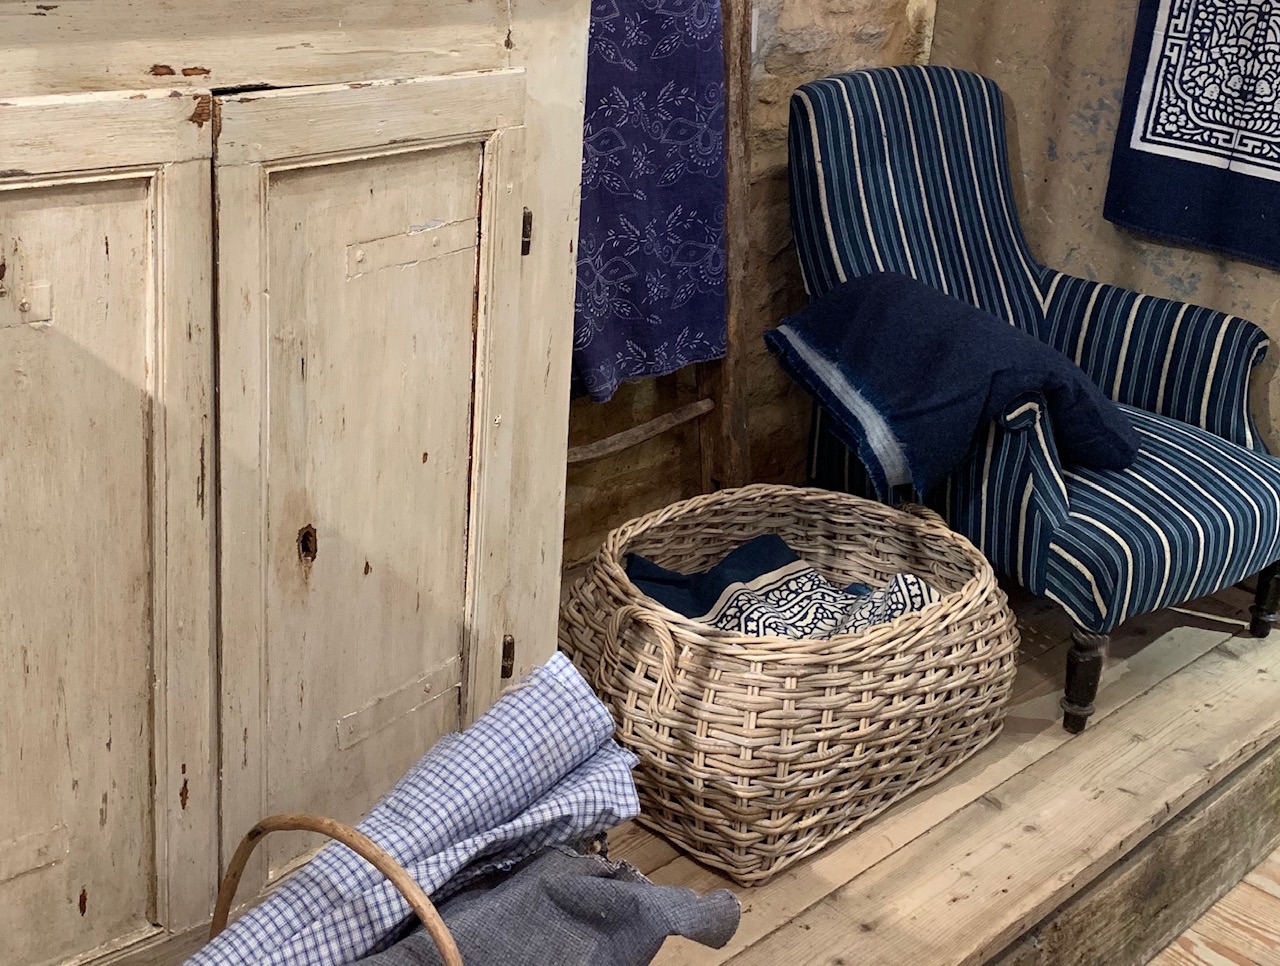 blue and white textiles,dayelsford,baskets,storage,sourcing for the home,